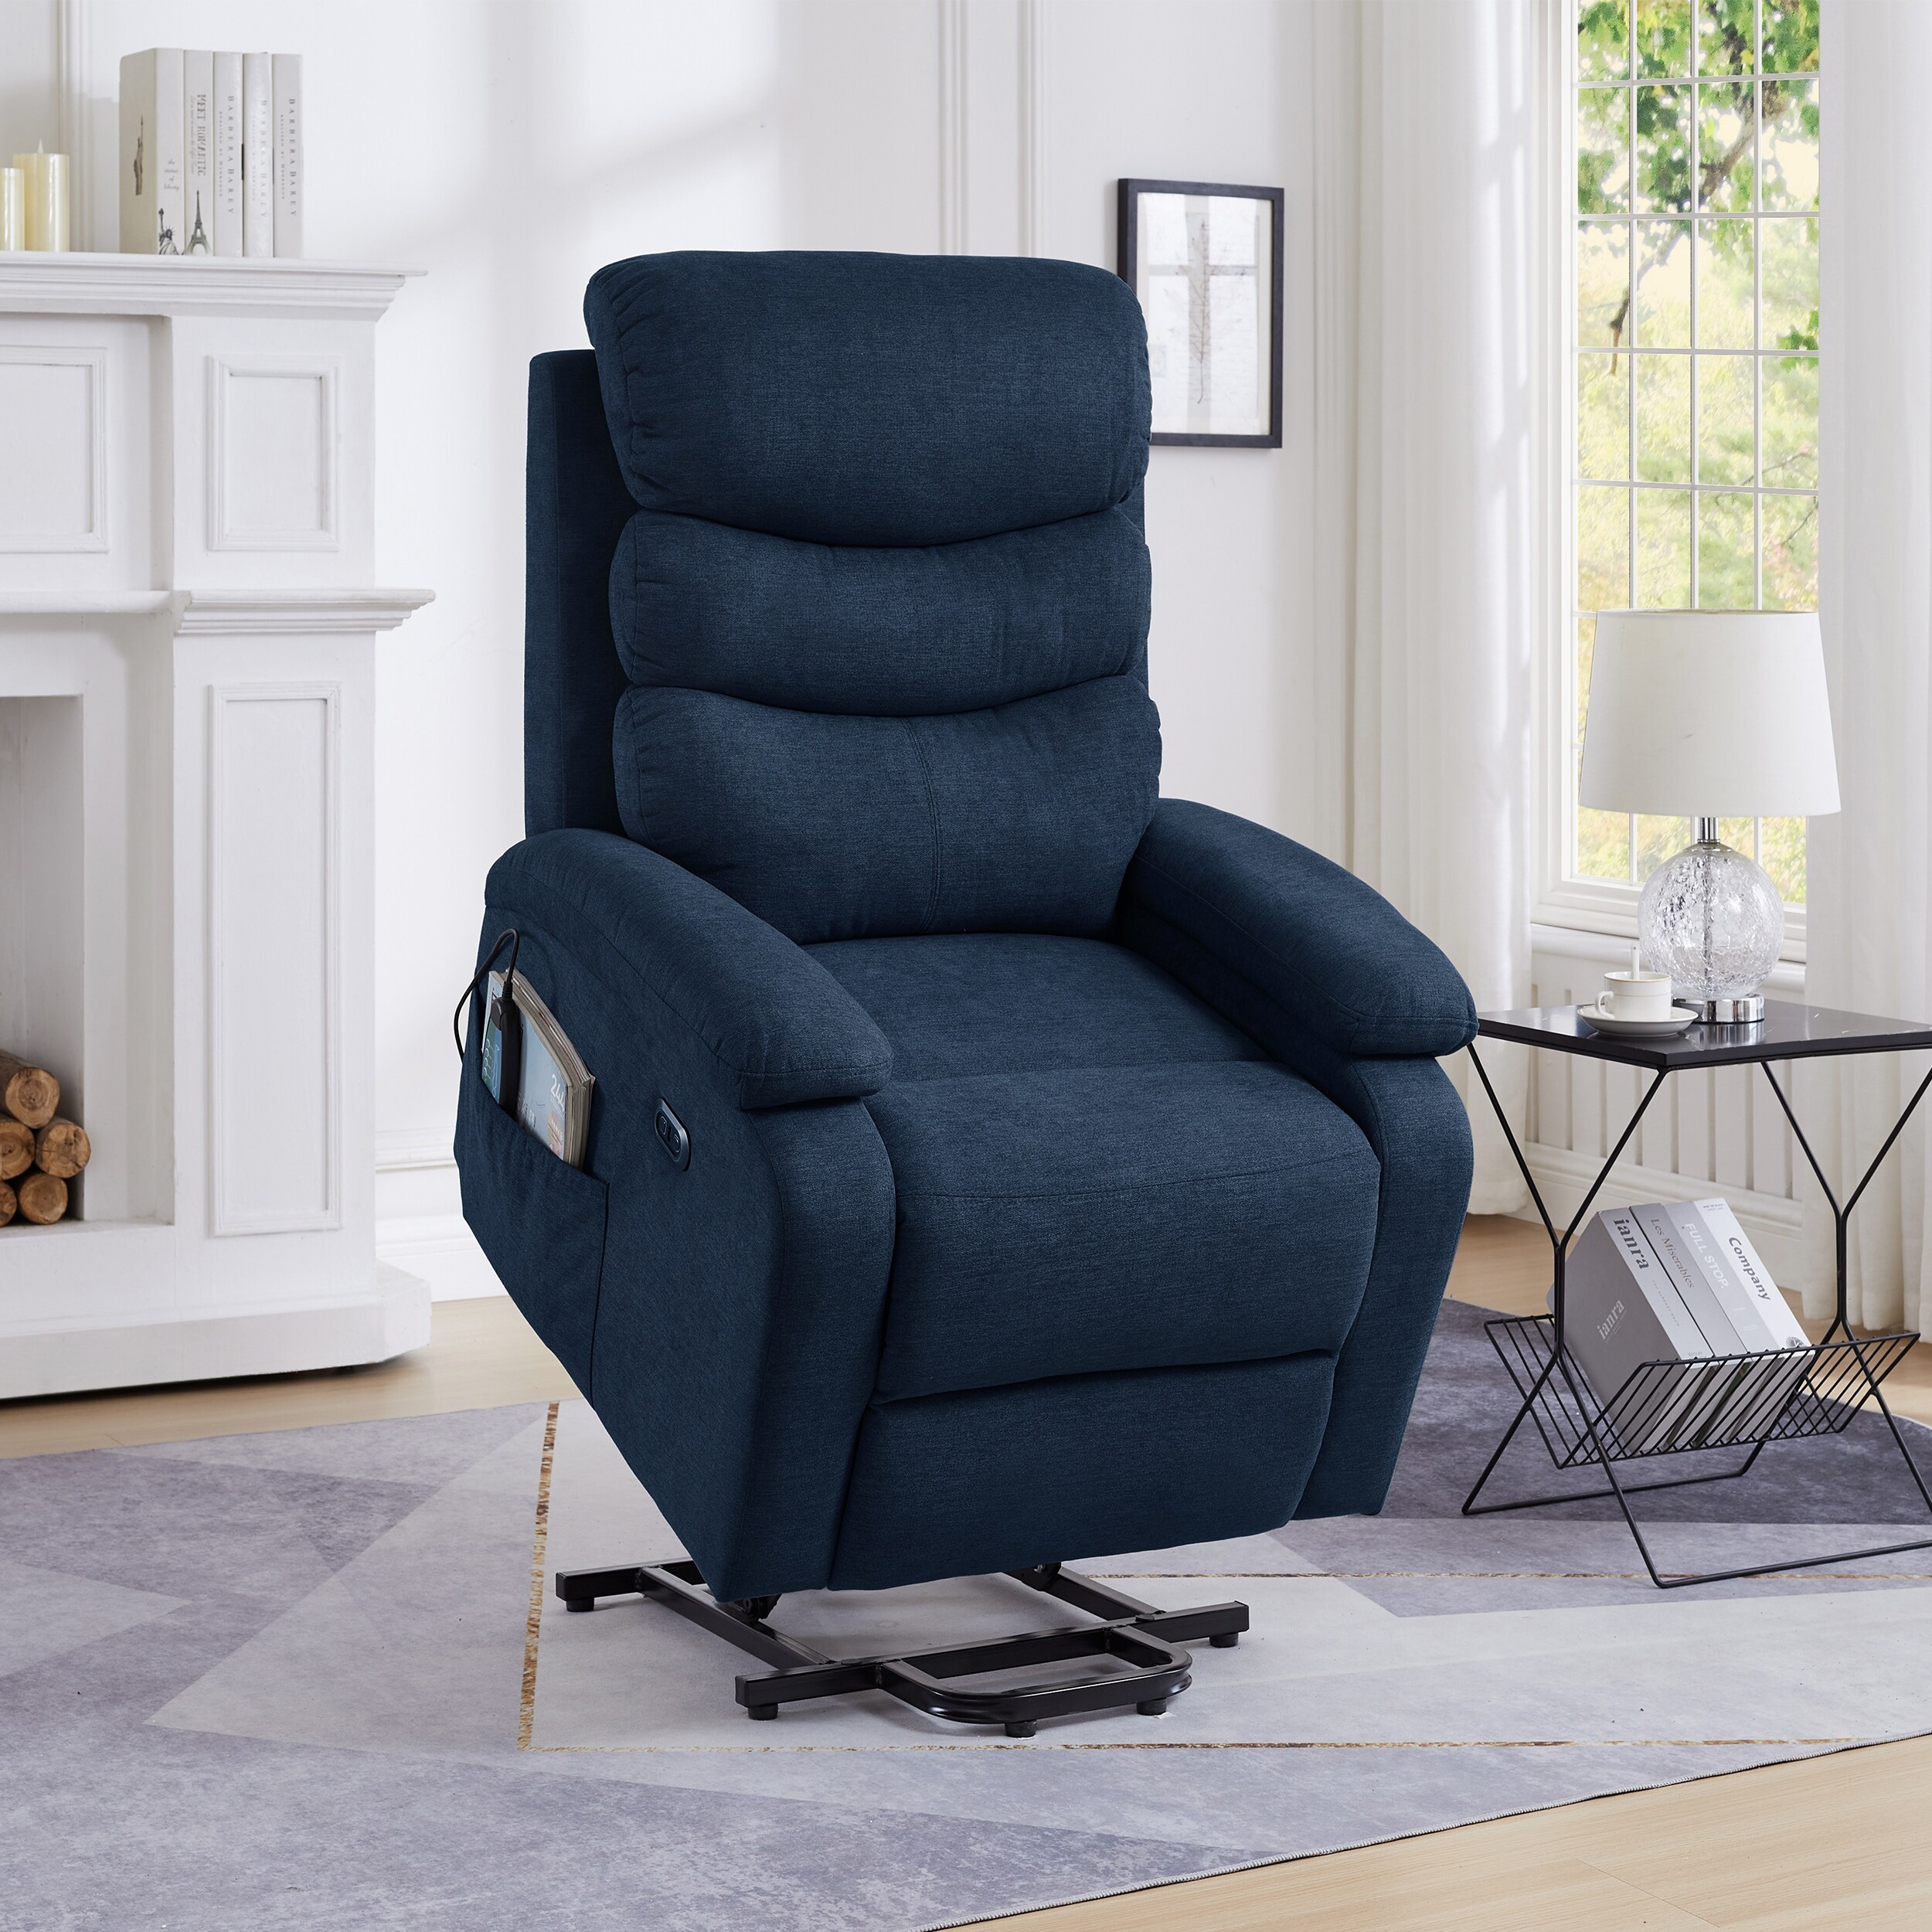 https://ak1.ostkcdn.com/images/products/is/images/direct/41bea1f4d613013f75f372bb3d107ed6ebf7126f/Power-Lift-Massage-Recliner-Sofa-Chair%2C-Home-Theater-Seating-Linen-Single-Sofa-Chaise%2C-with-USB-Port%2C-Vibration-and-Heating.jpg